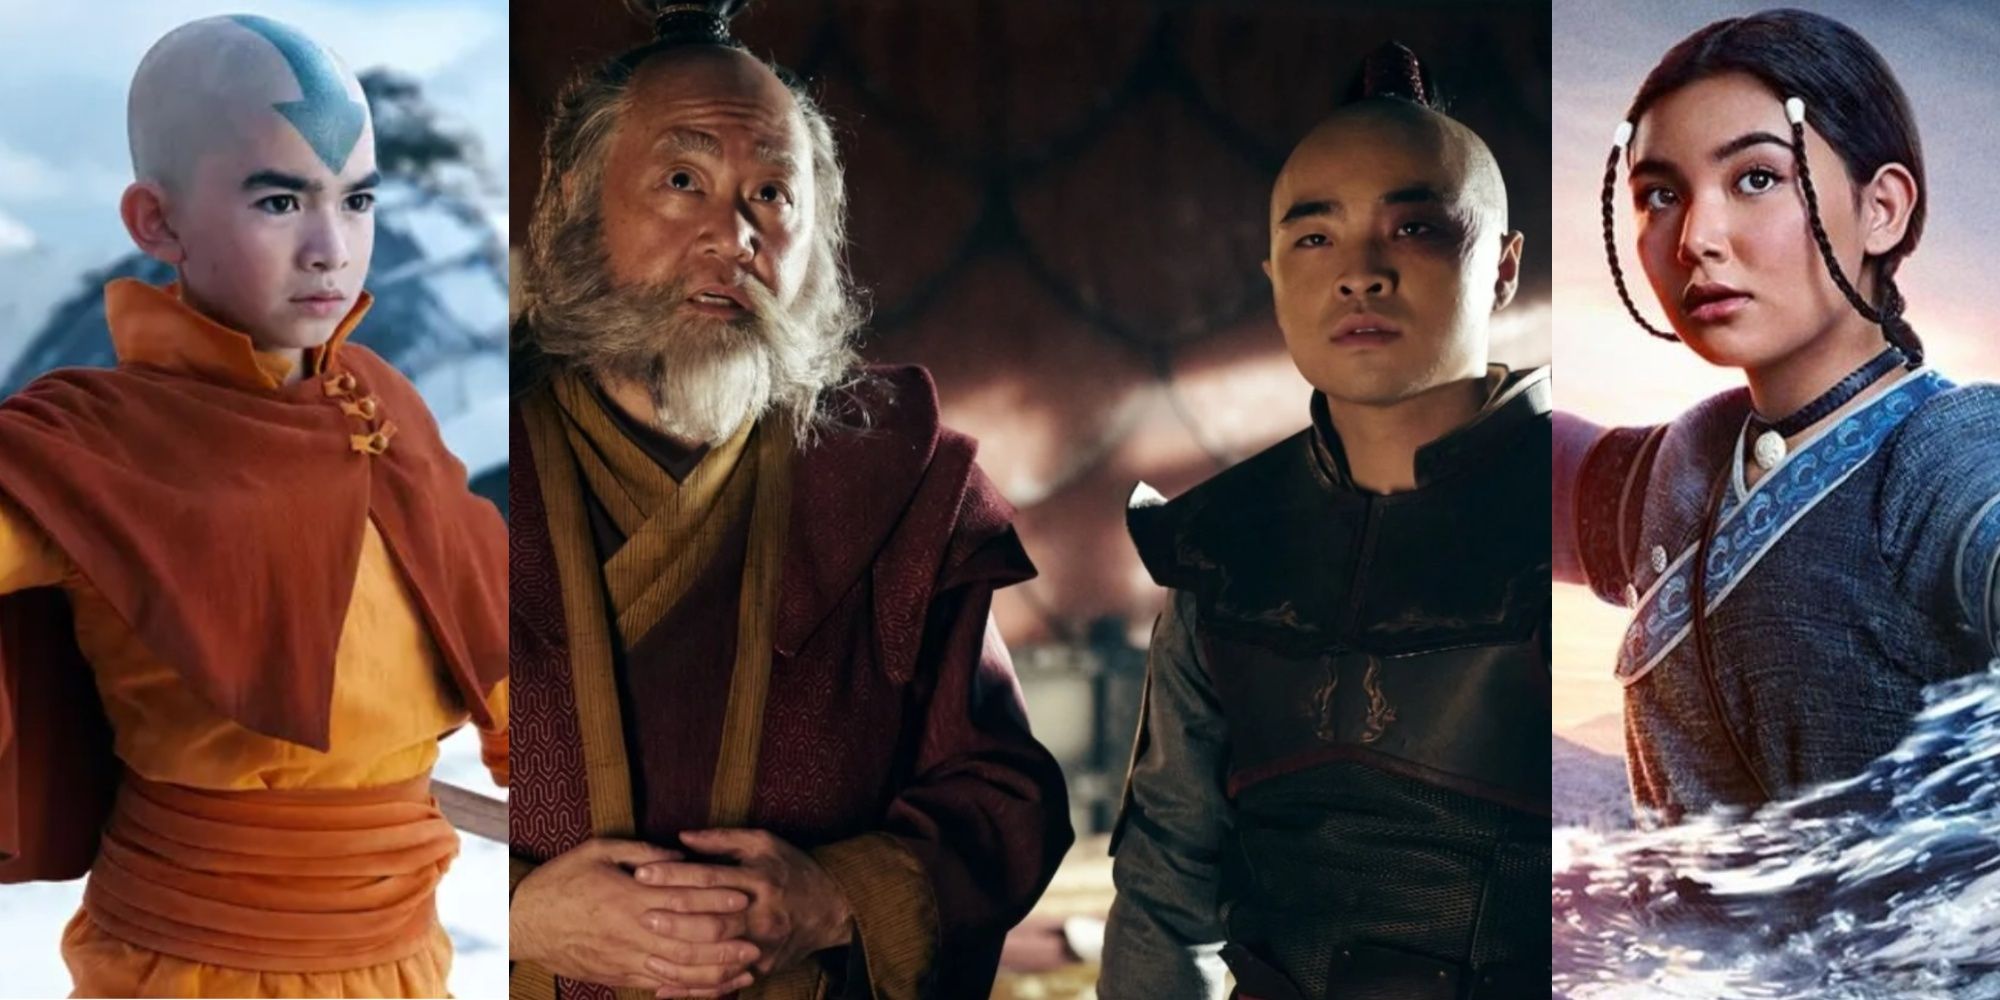 Live Action References in the Netflic series, from the left, Gordon Cormier as Aang, Paul Sun-Hyung Lee as Uncle Iroh, Dallas Liu Prince Zuko, and Kiawentiio as Katara